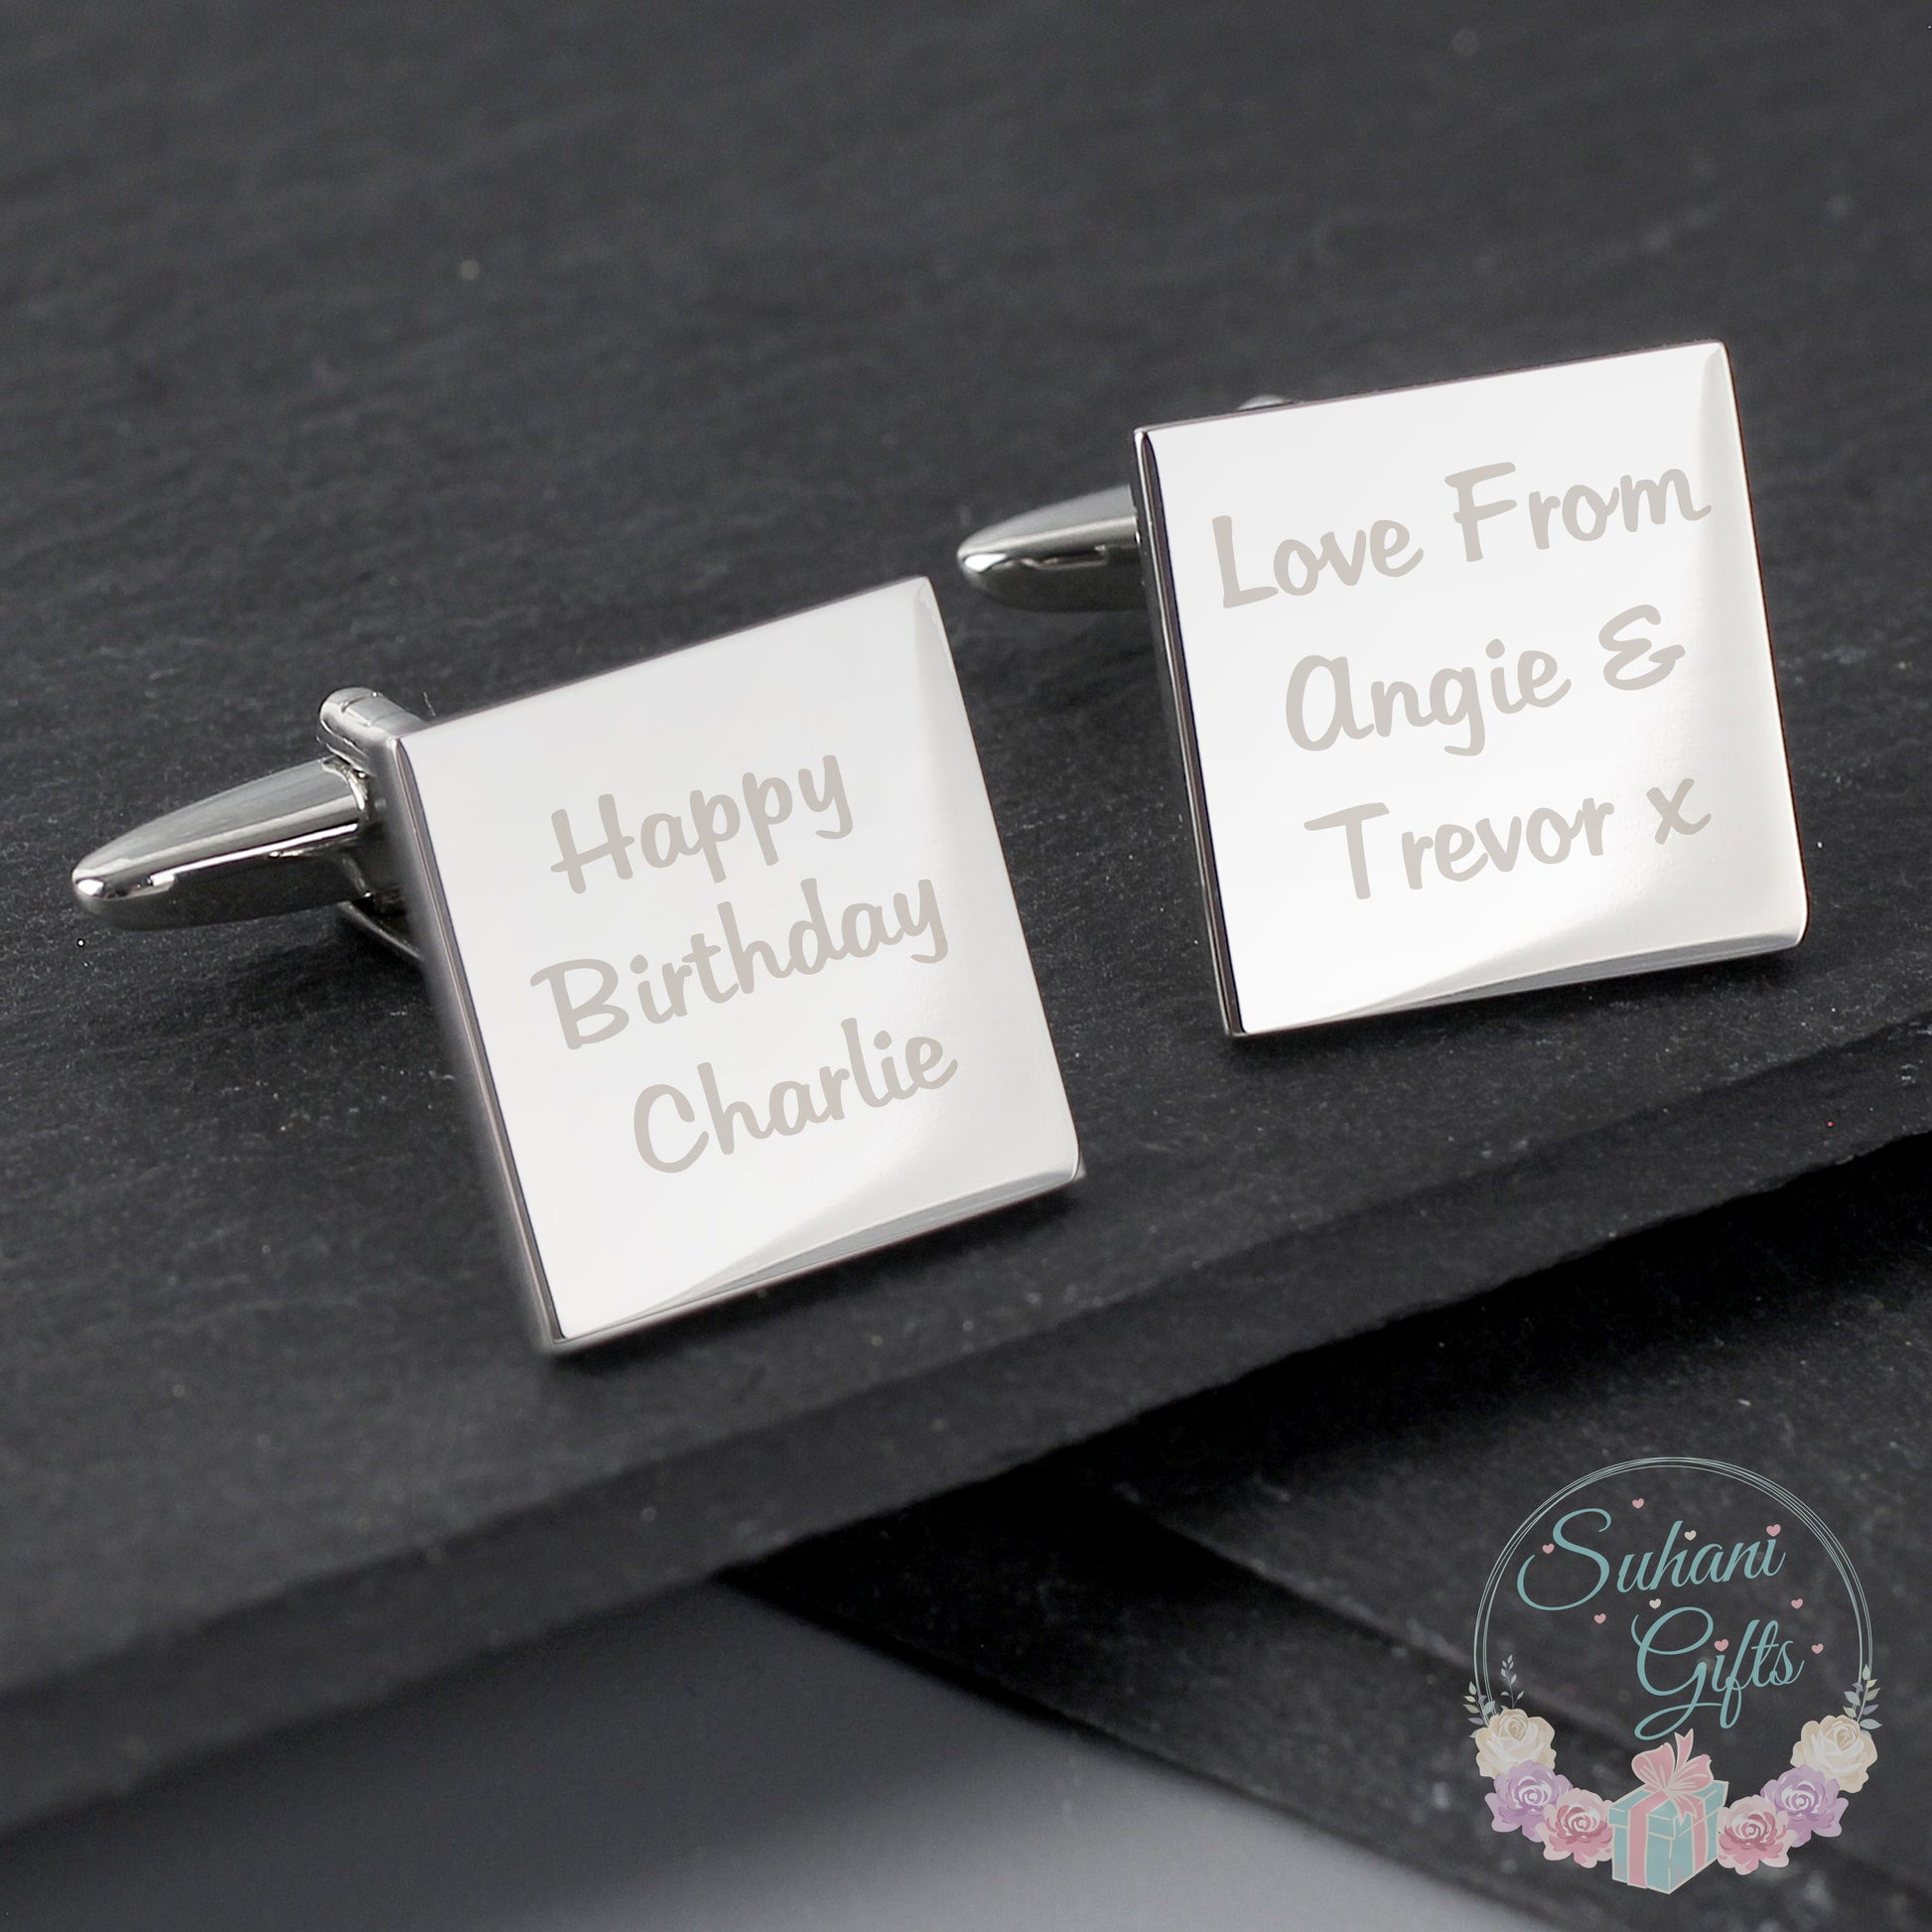 Personalised Any Message Square Cufflinks - 3 lines - Suhani Gifts